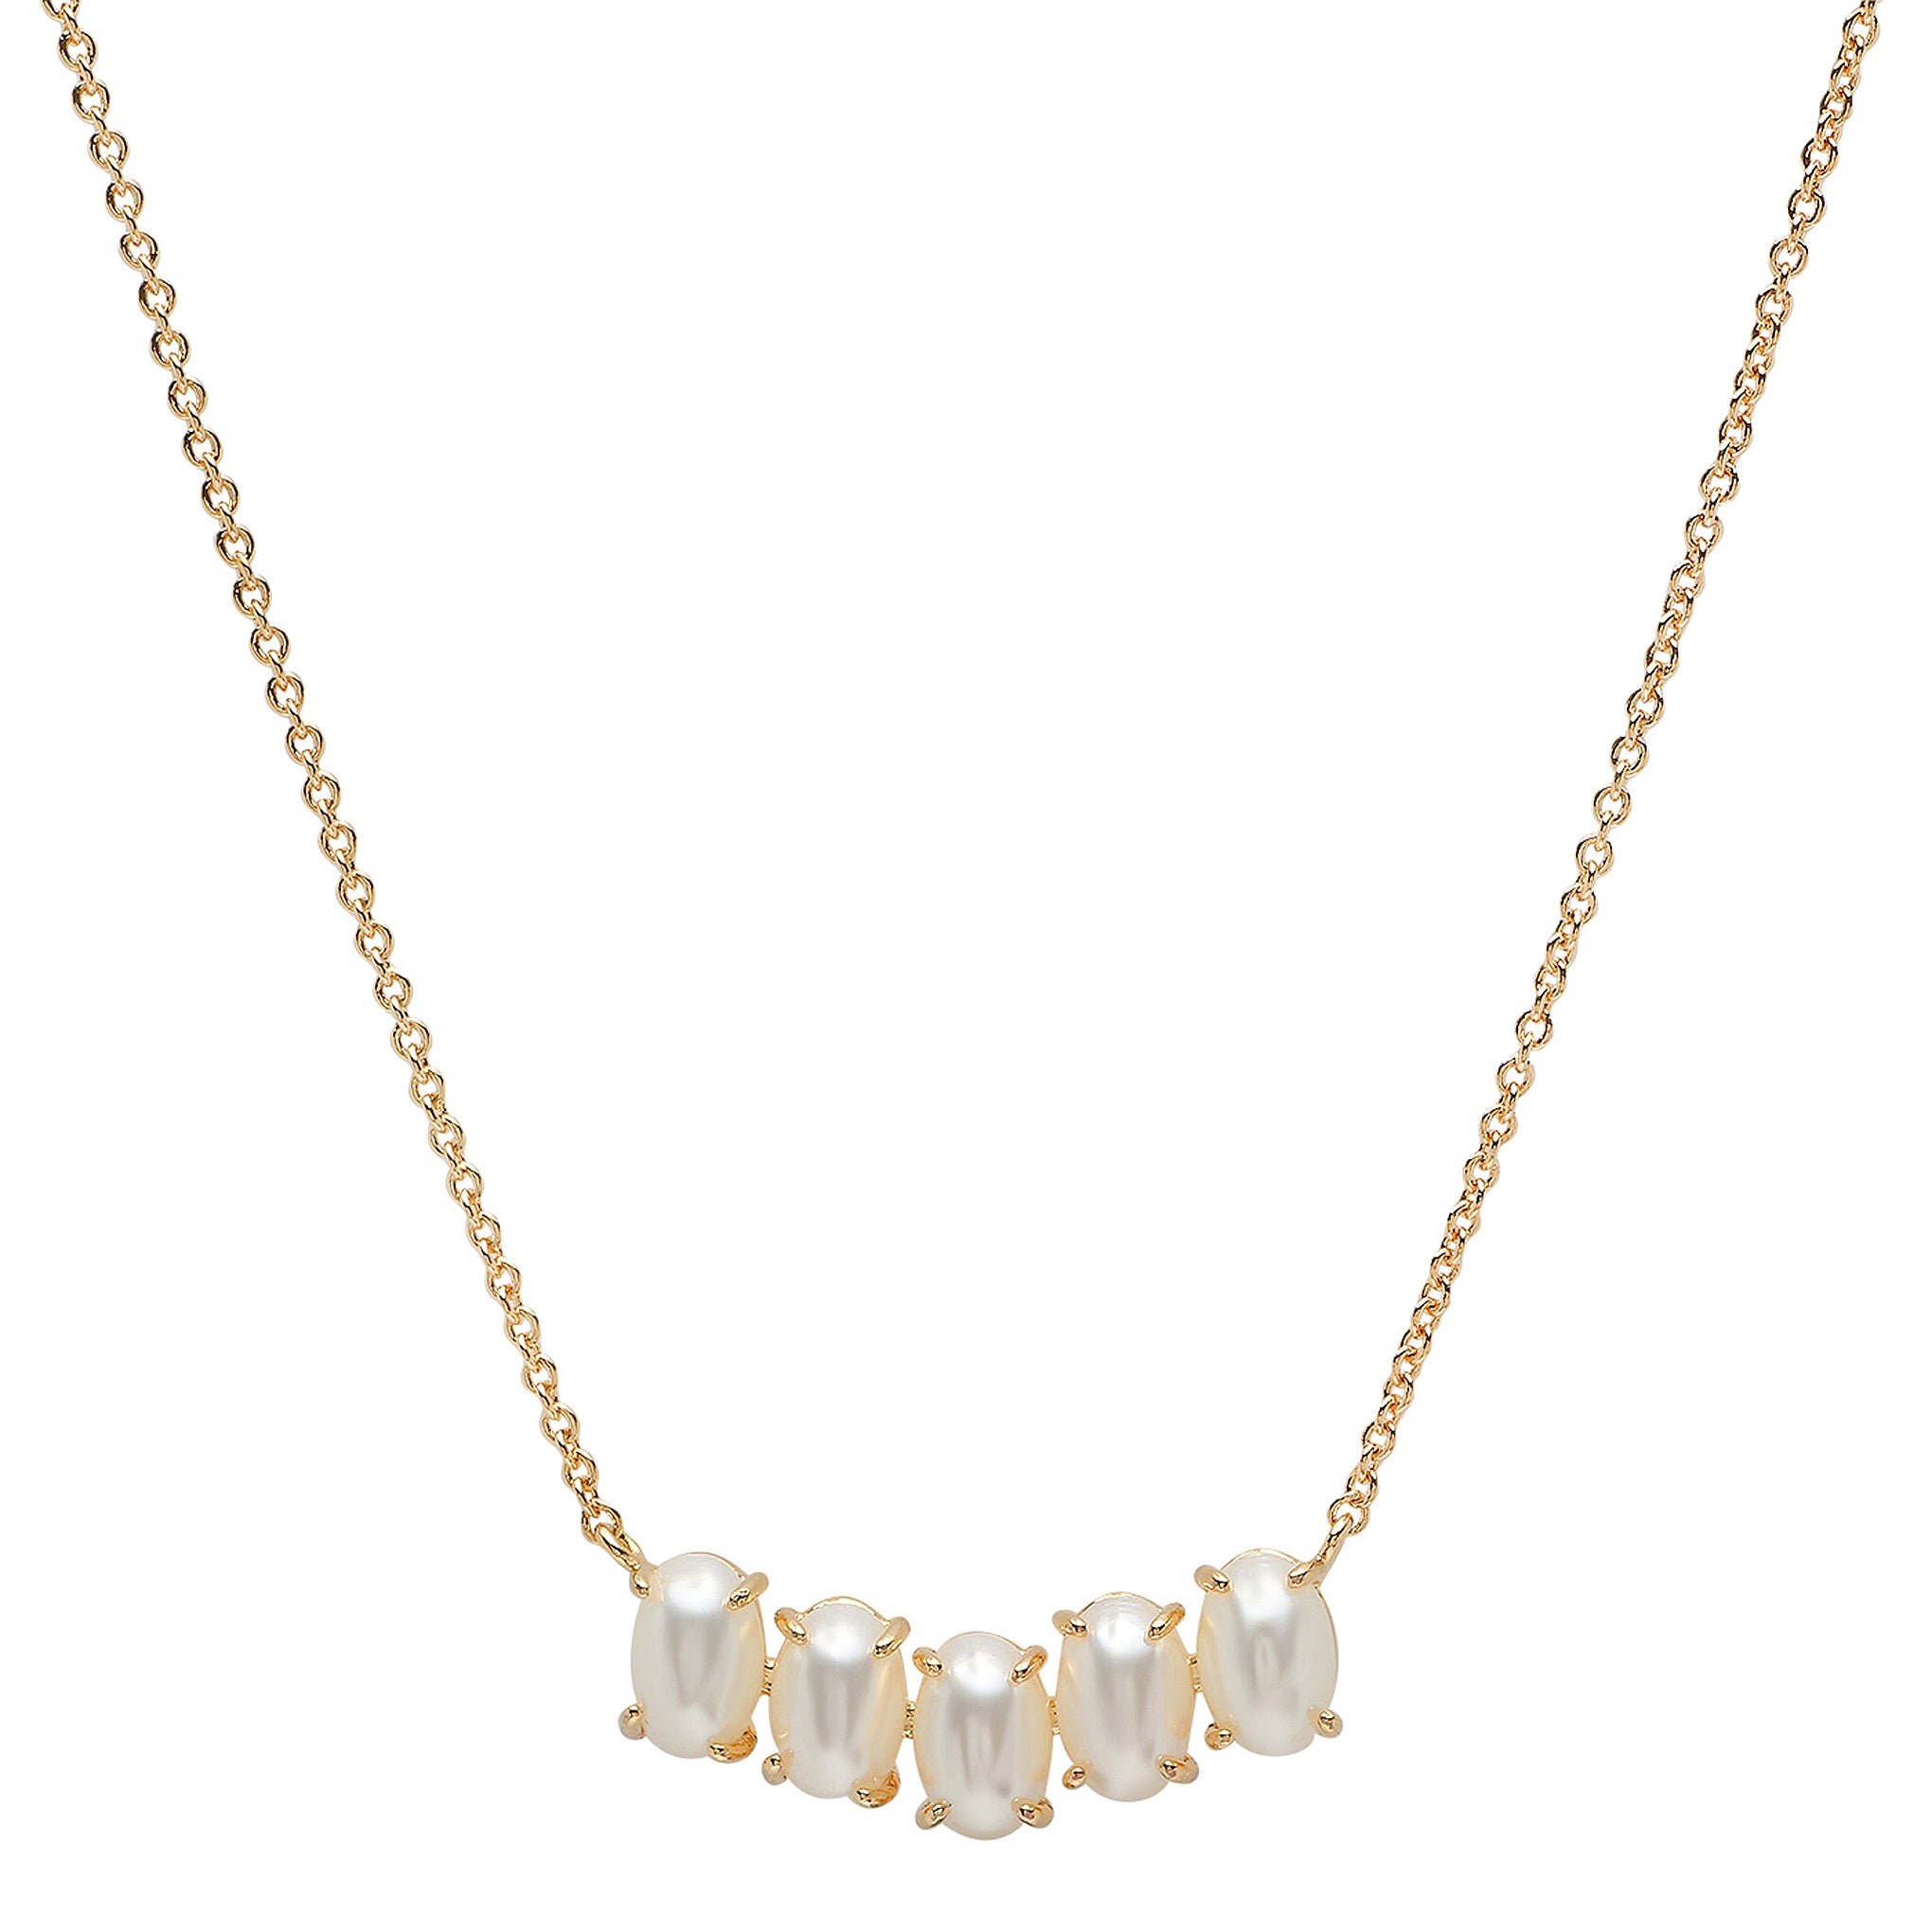 Tai Cluster Birthstone Pendant Necklace in 14k Gold Plated